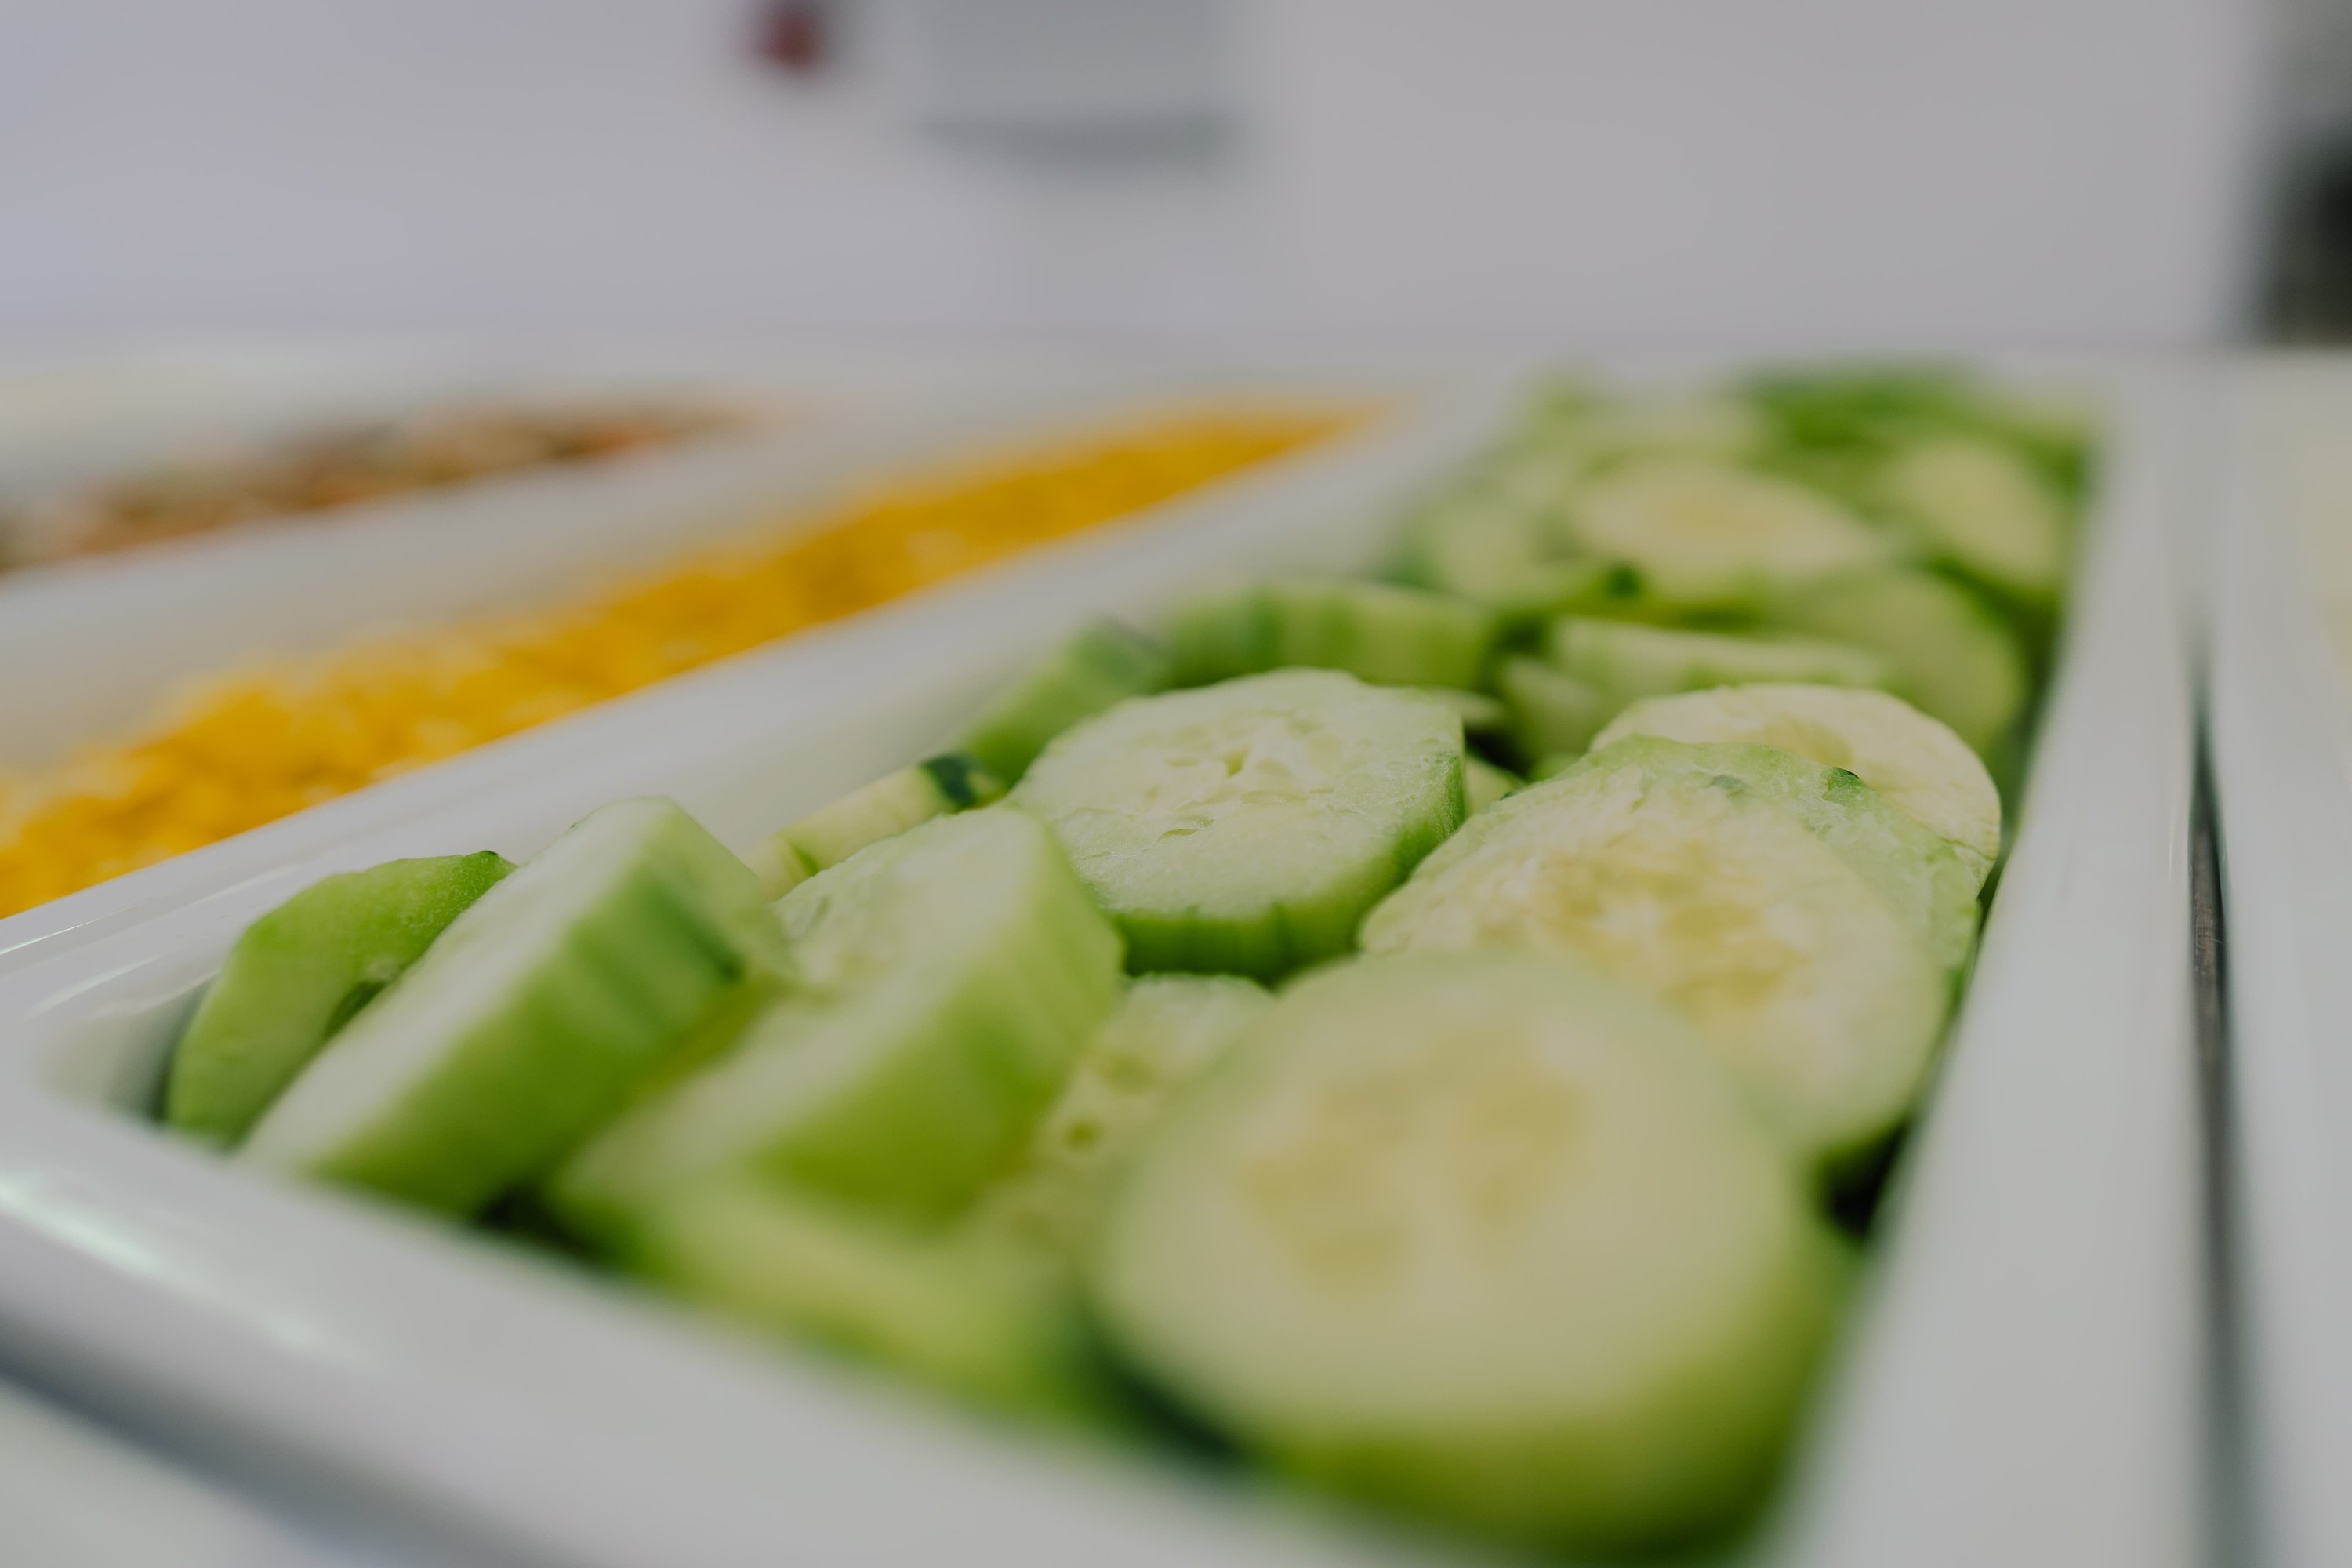 a tray of sliced cucumbers sits on a table